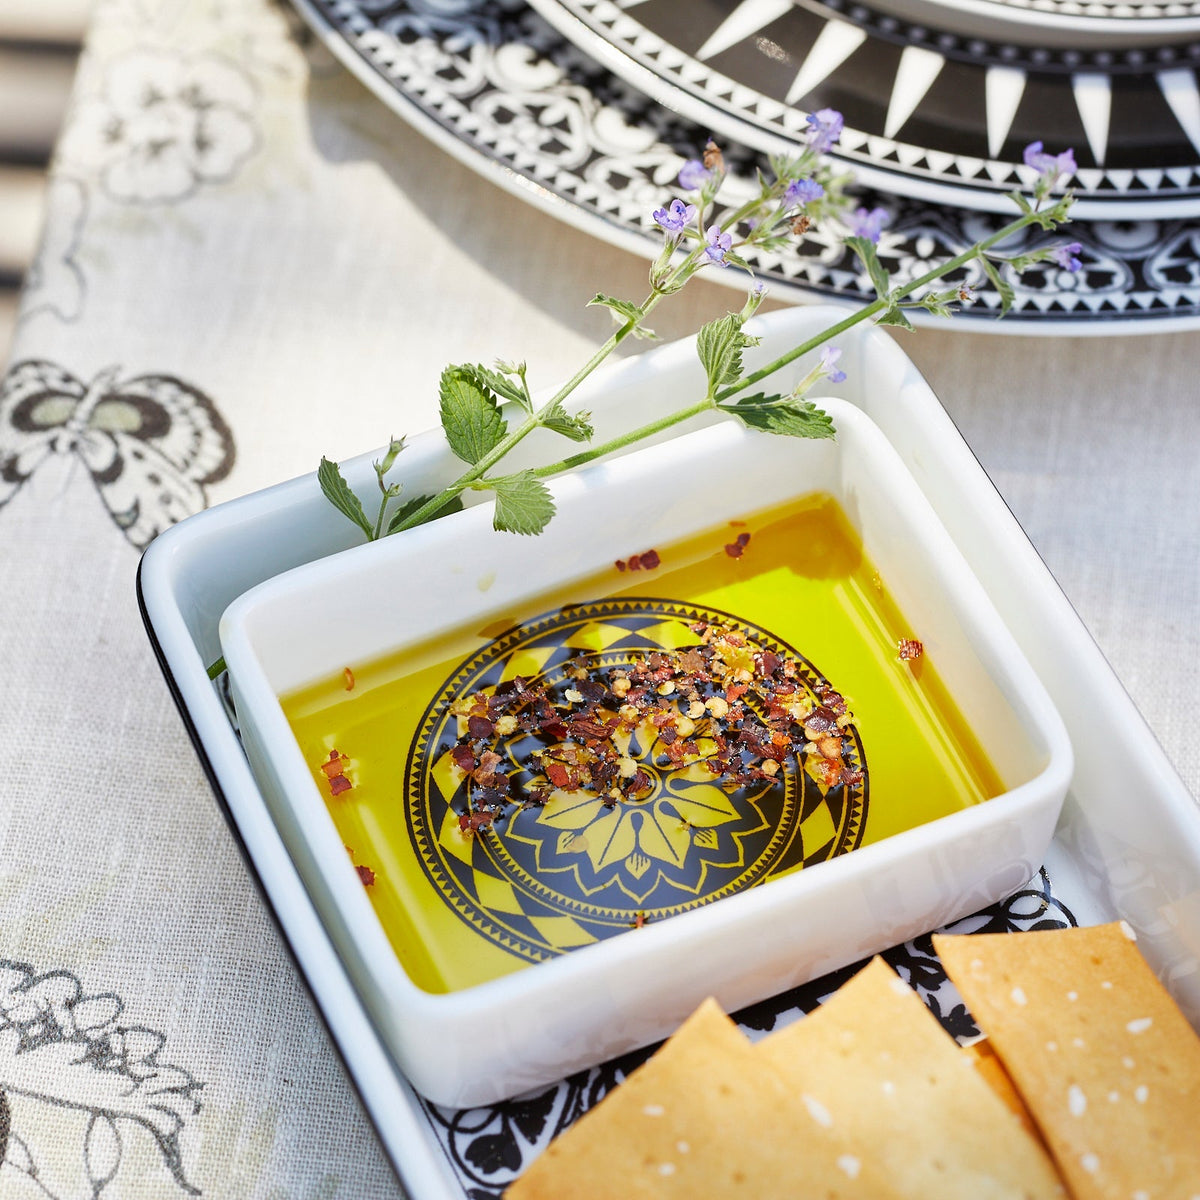 Close up of Casablanca Nested Appetizer Tray Set by Caskata. The tray is used as a dipping dish holding flavored olive oil and crackers and sits atop a floral tablecloth next to Casablanca and Marrakech dinnerware.